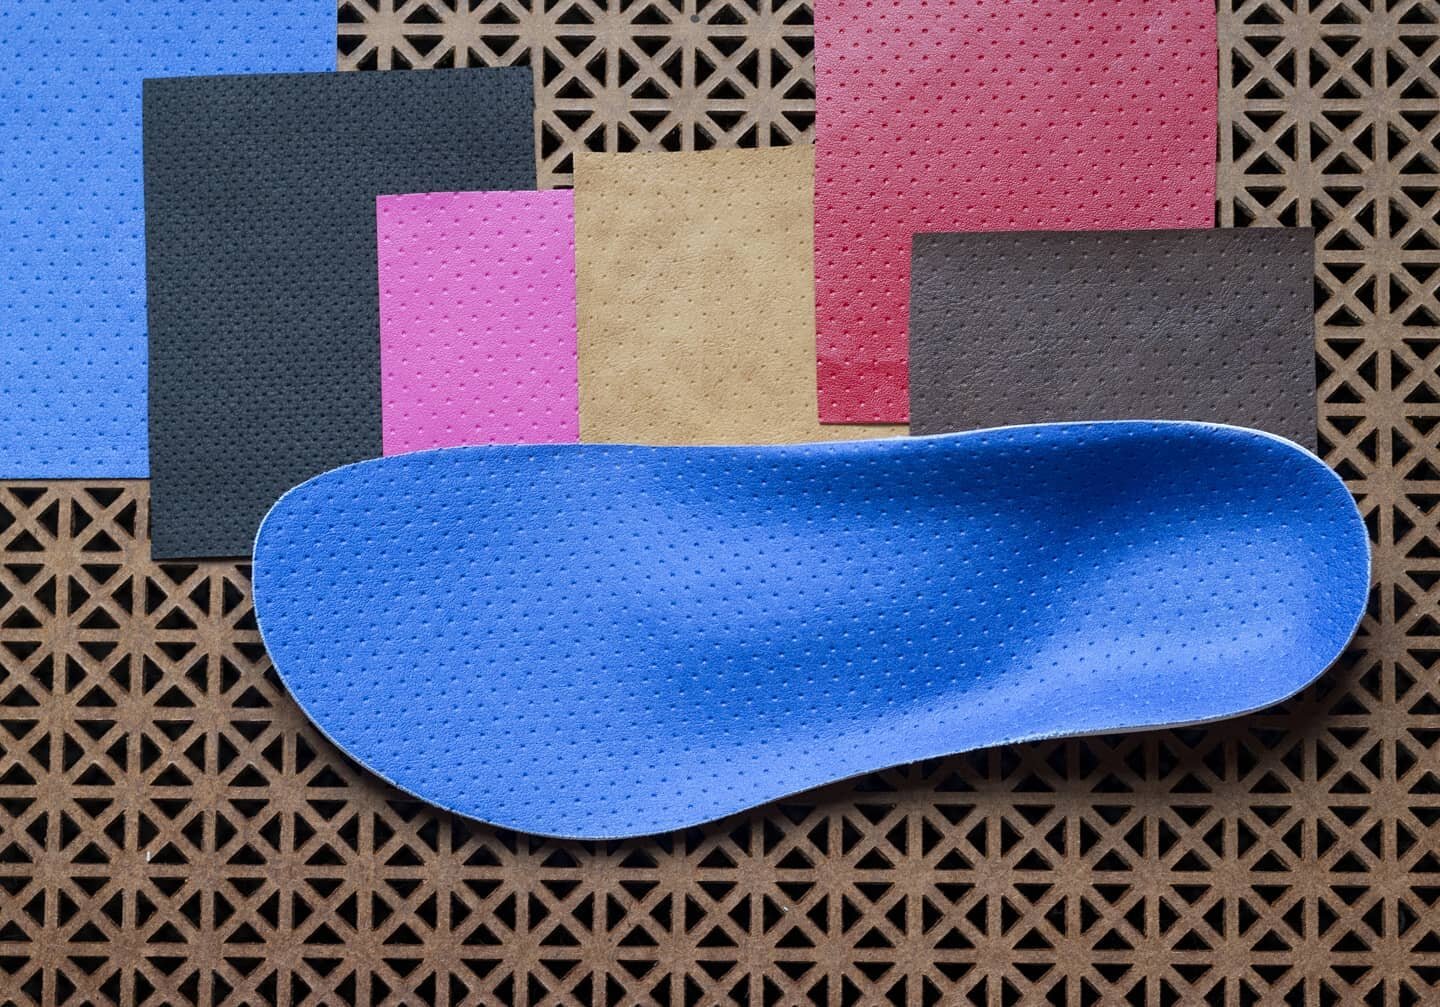 A little color to brighten your day!

There's something fun about having a colorful orthotic in your shoe🎨

#customorthotics #injuryprevention #posturalalignment #custommade #hamptonnh
#portsmouthnh #newhampshiremade
#newhampshire #seacoastnh #color